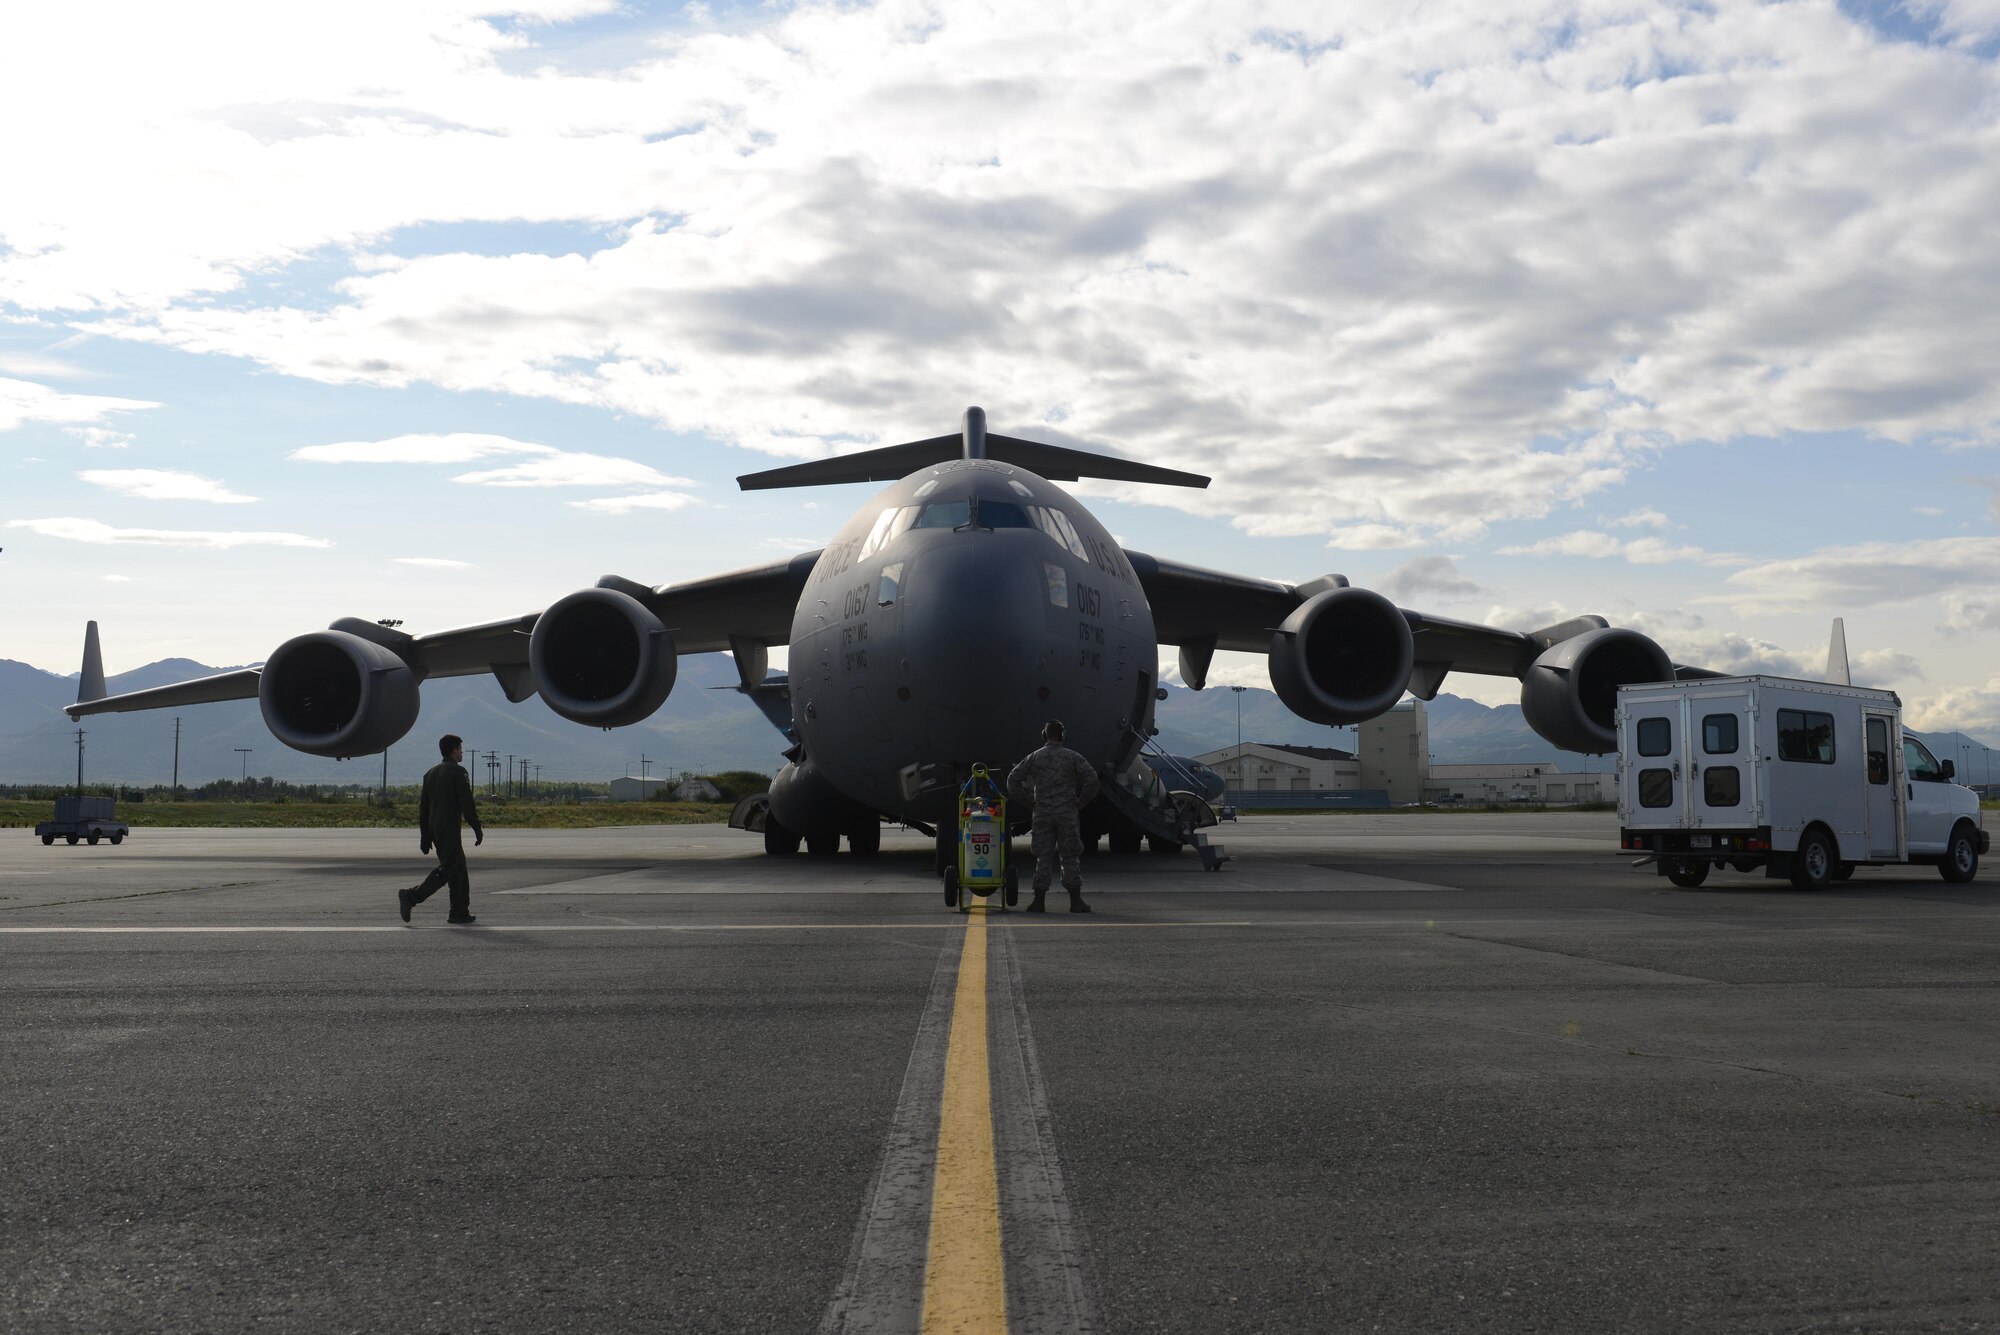 Airmen fuel a C-17 Globemaster III, at Joint Base Elmendorf-Richardson, Alaska, Aug. 28, 2017, preparing to leave for Texas to provide humanitarian support after Hurricane Harvey. The Air National Guard 176th Wing sent personnel from the 212th Rescue Squadron and 249th Airlift Squadron to provide search-and-rescue, and support aeromedical evacuation and humanitarian relief.